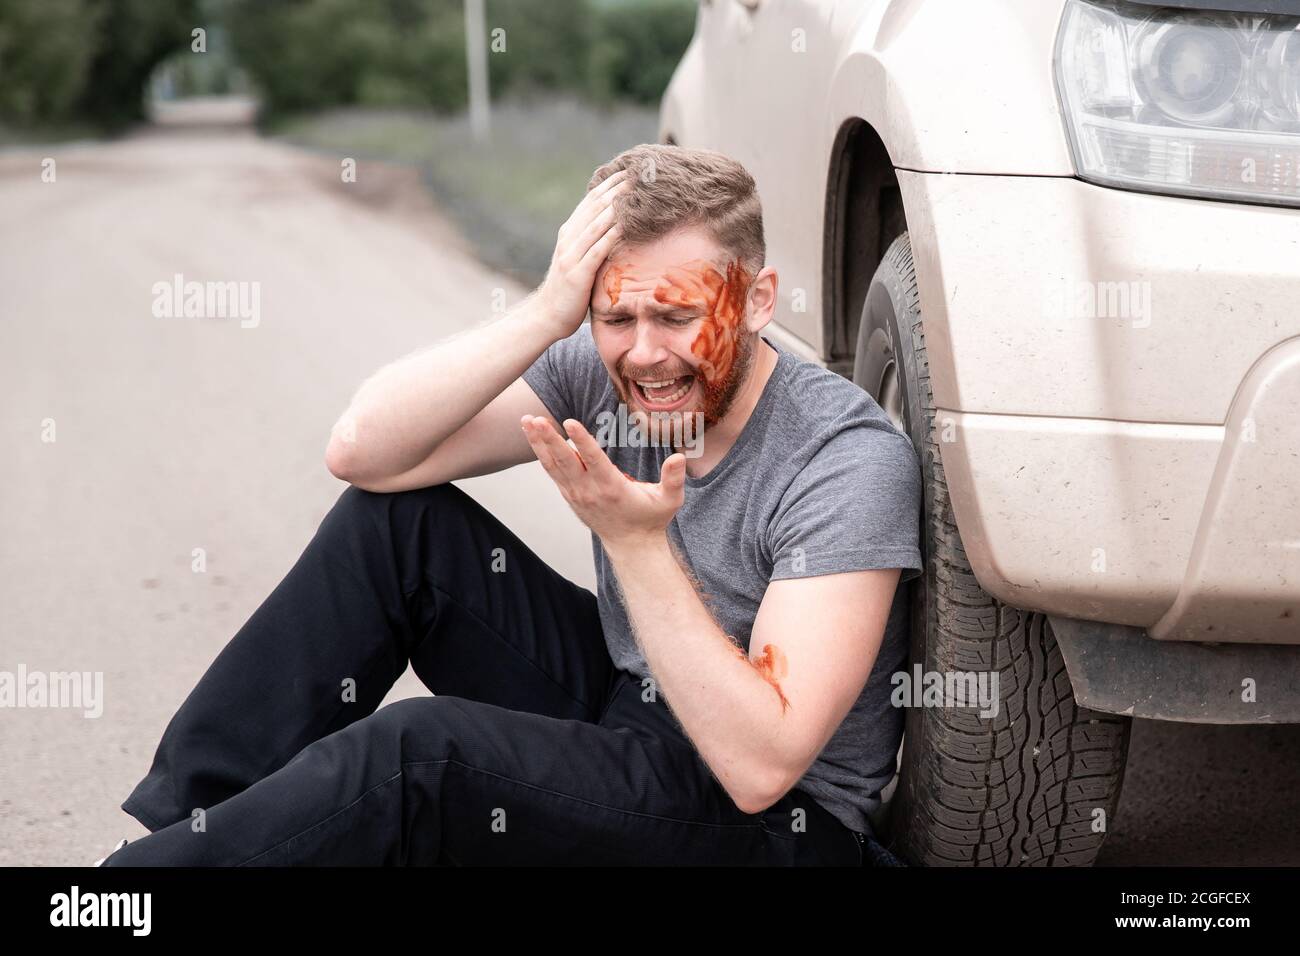 Car accident, man sits with bloodied head near wheel, screaming and crying  Stock Photo - Alamy